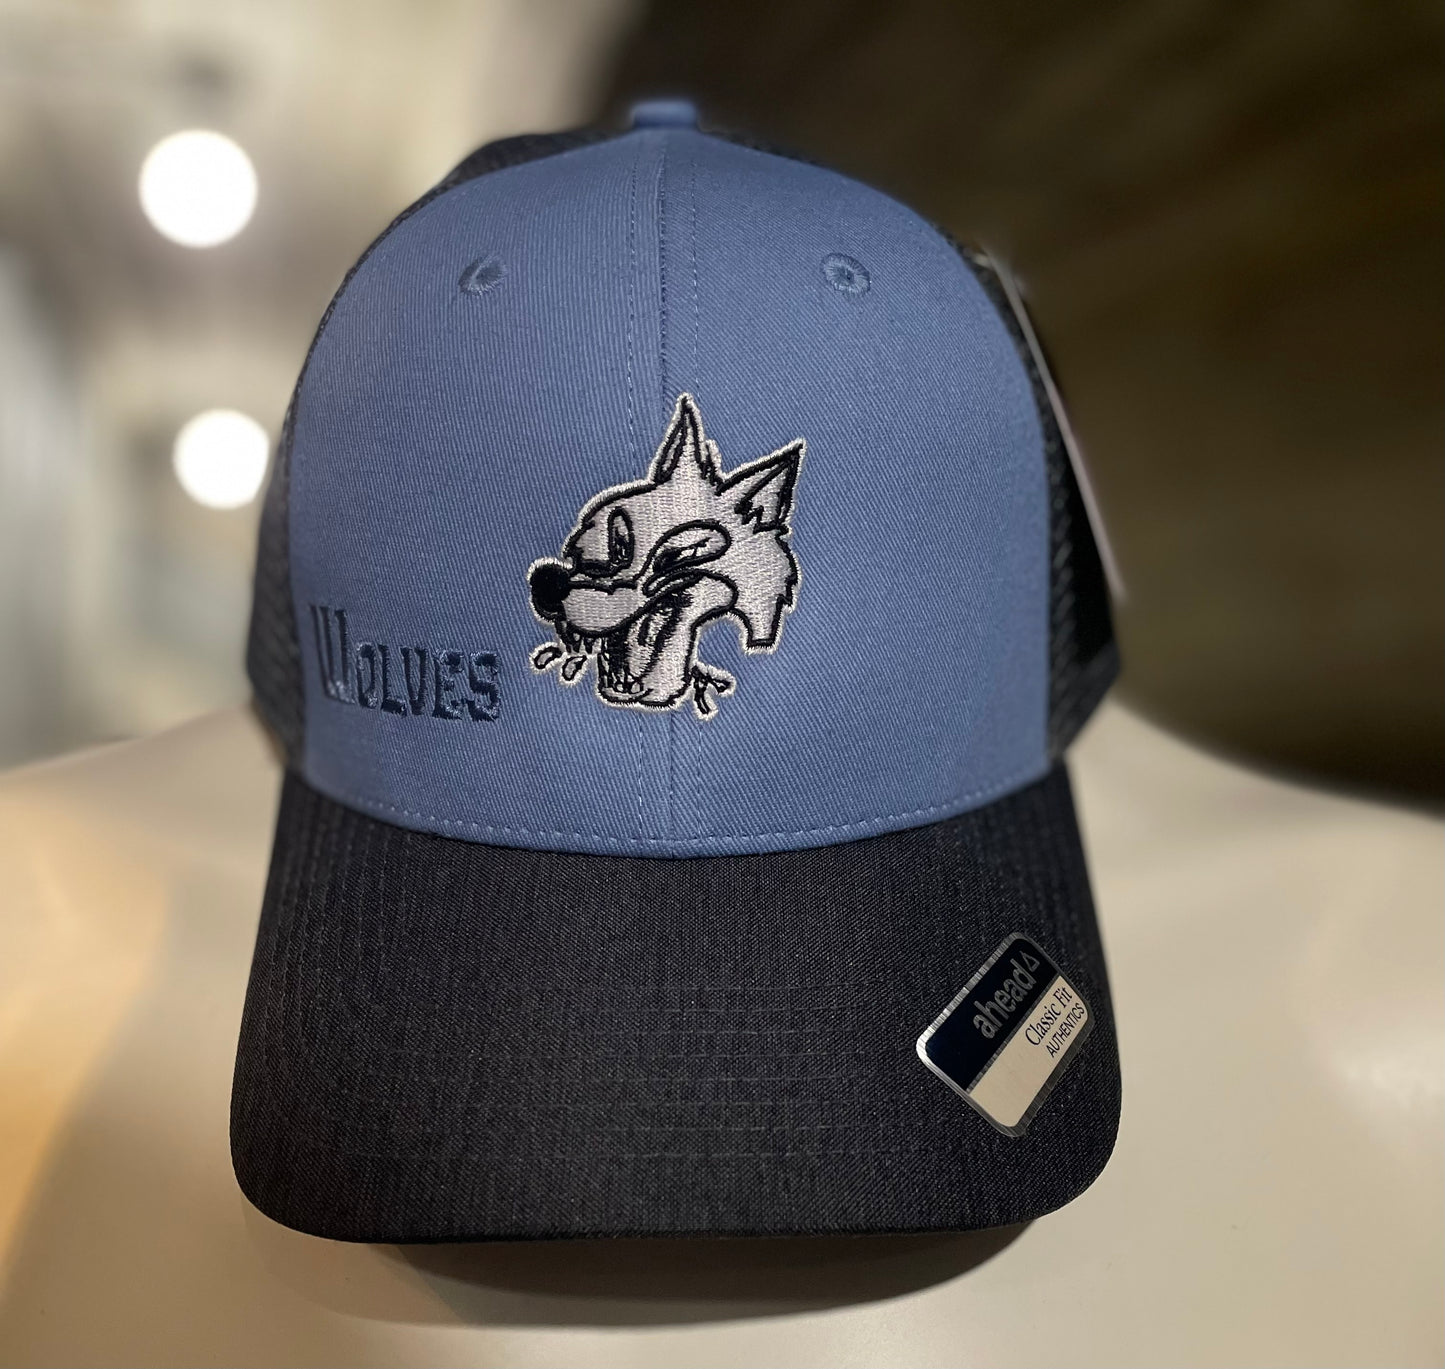 Wolves Charcoal/Blue Twill Mesh Snap Back